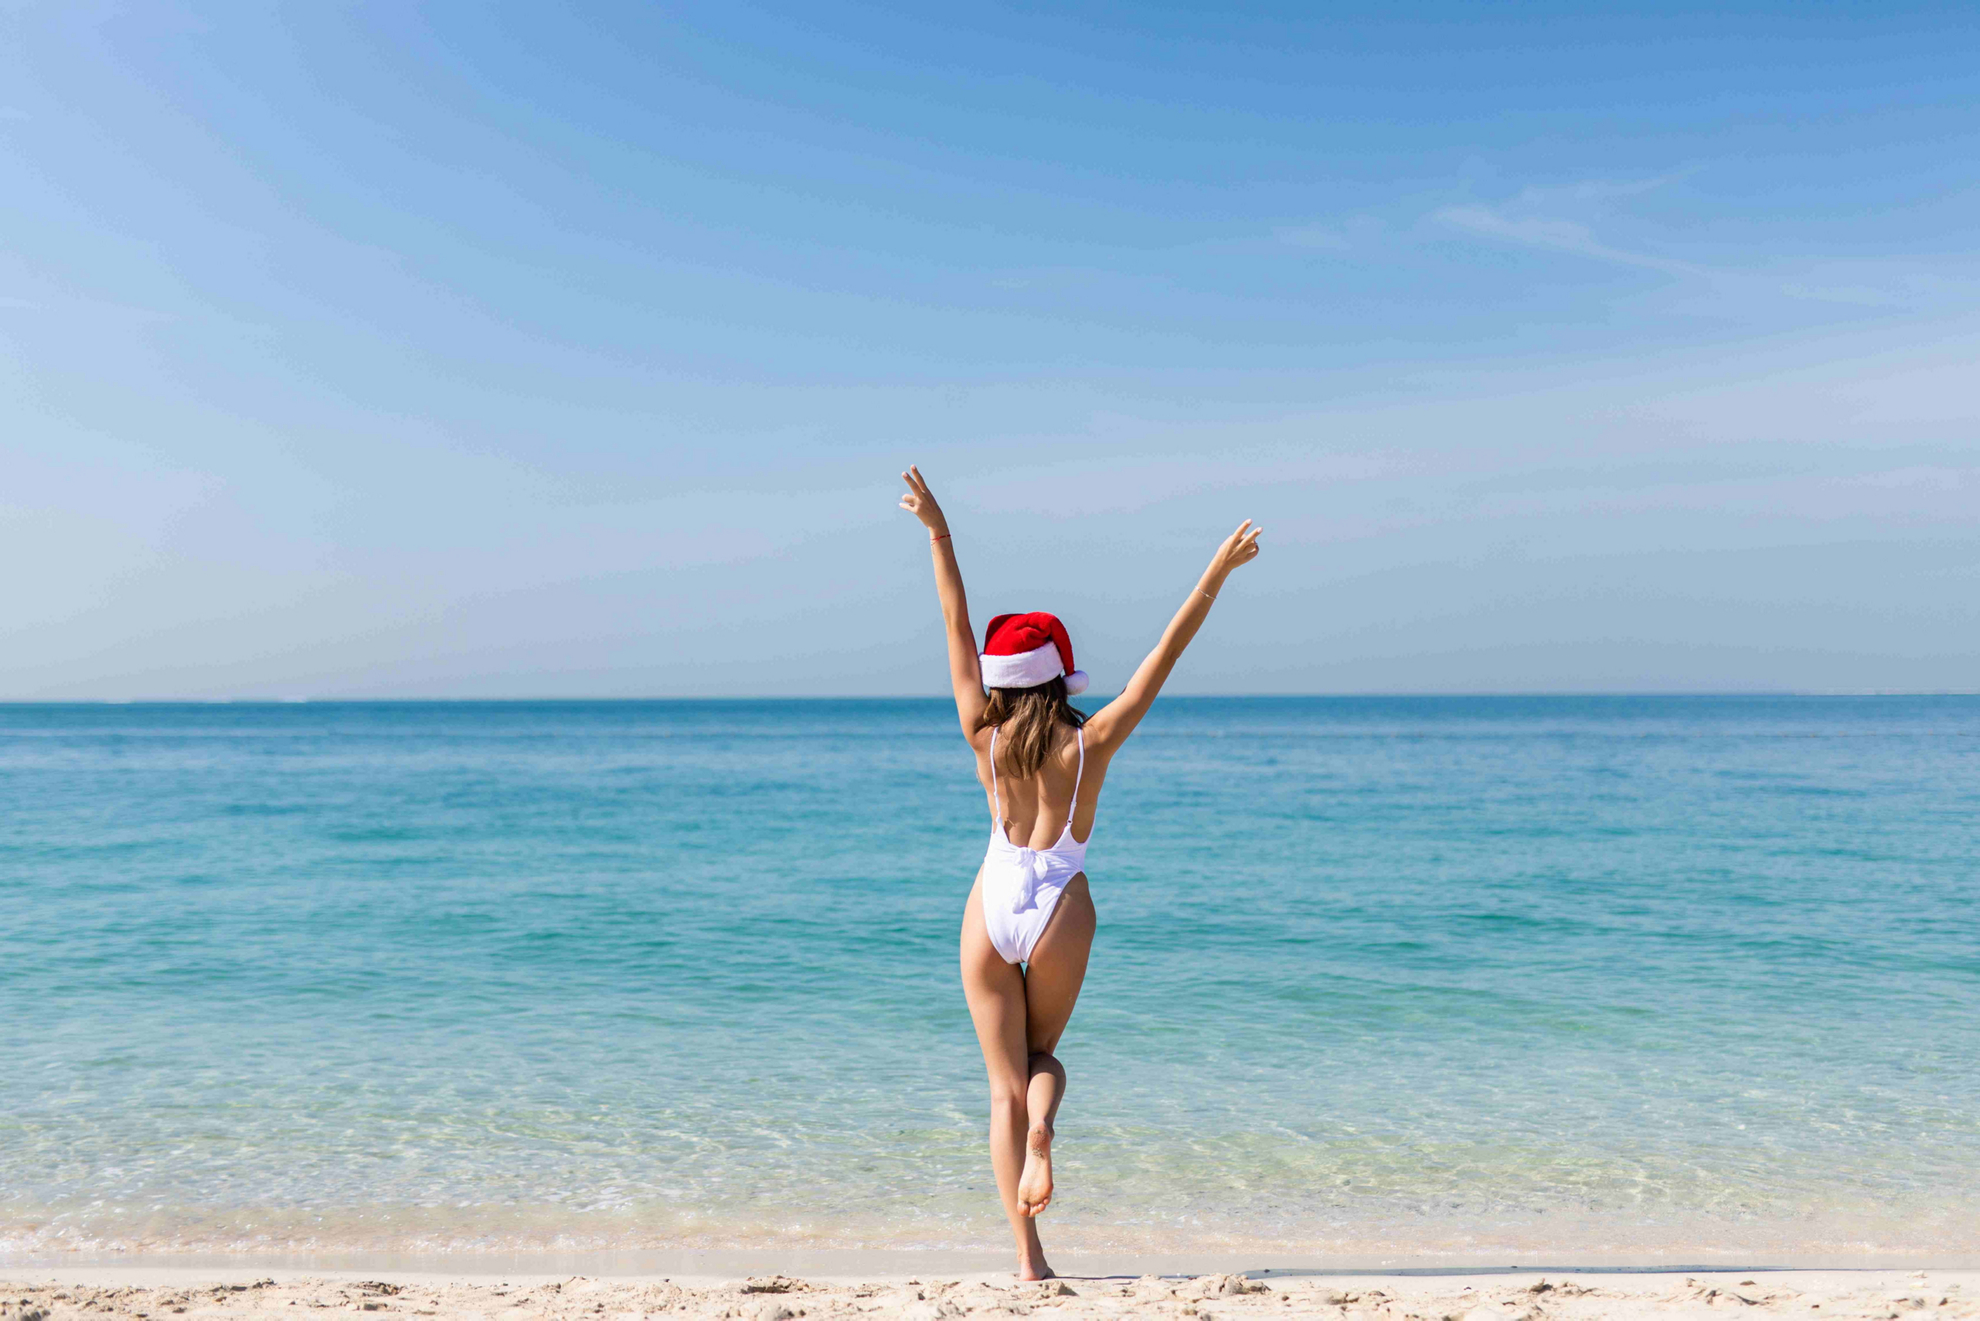 Book your Canary Islands Christmas holidays now to avoid missing out in December